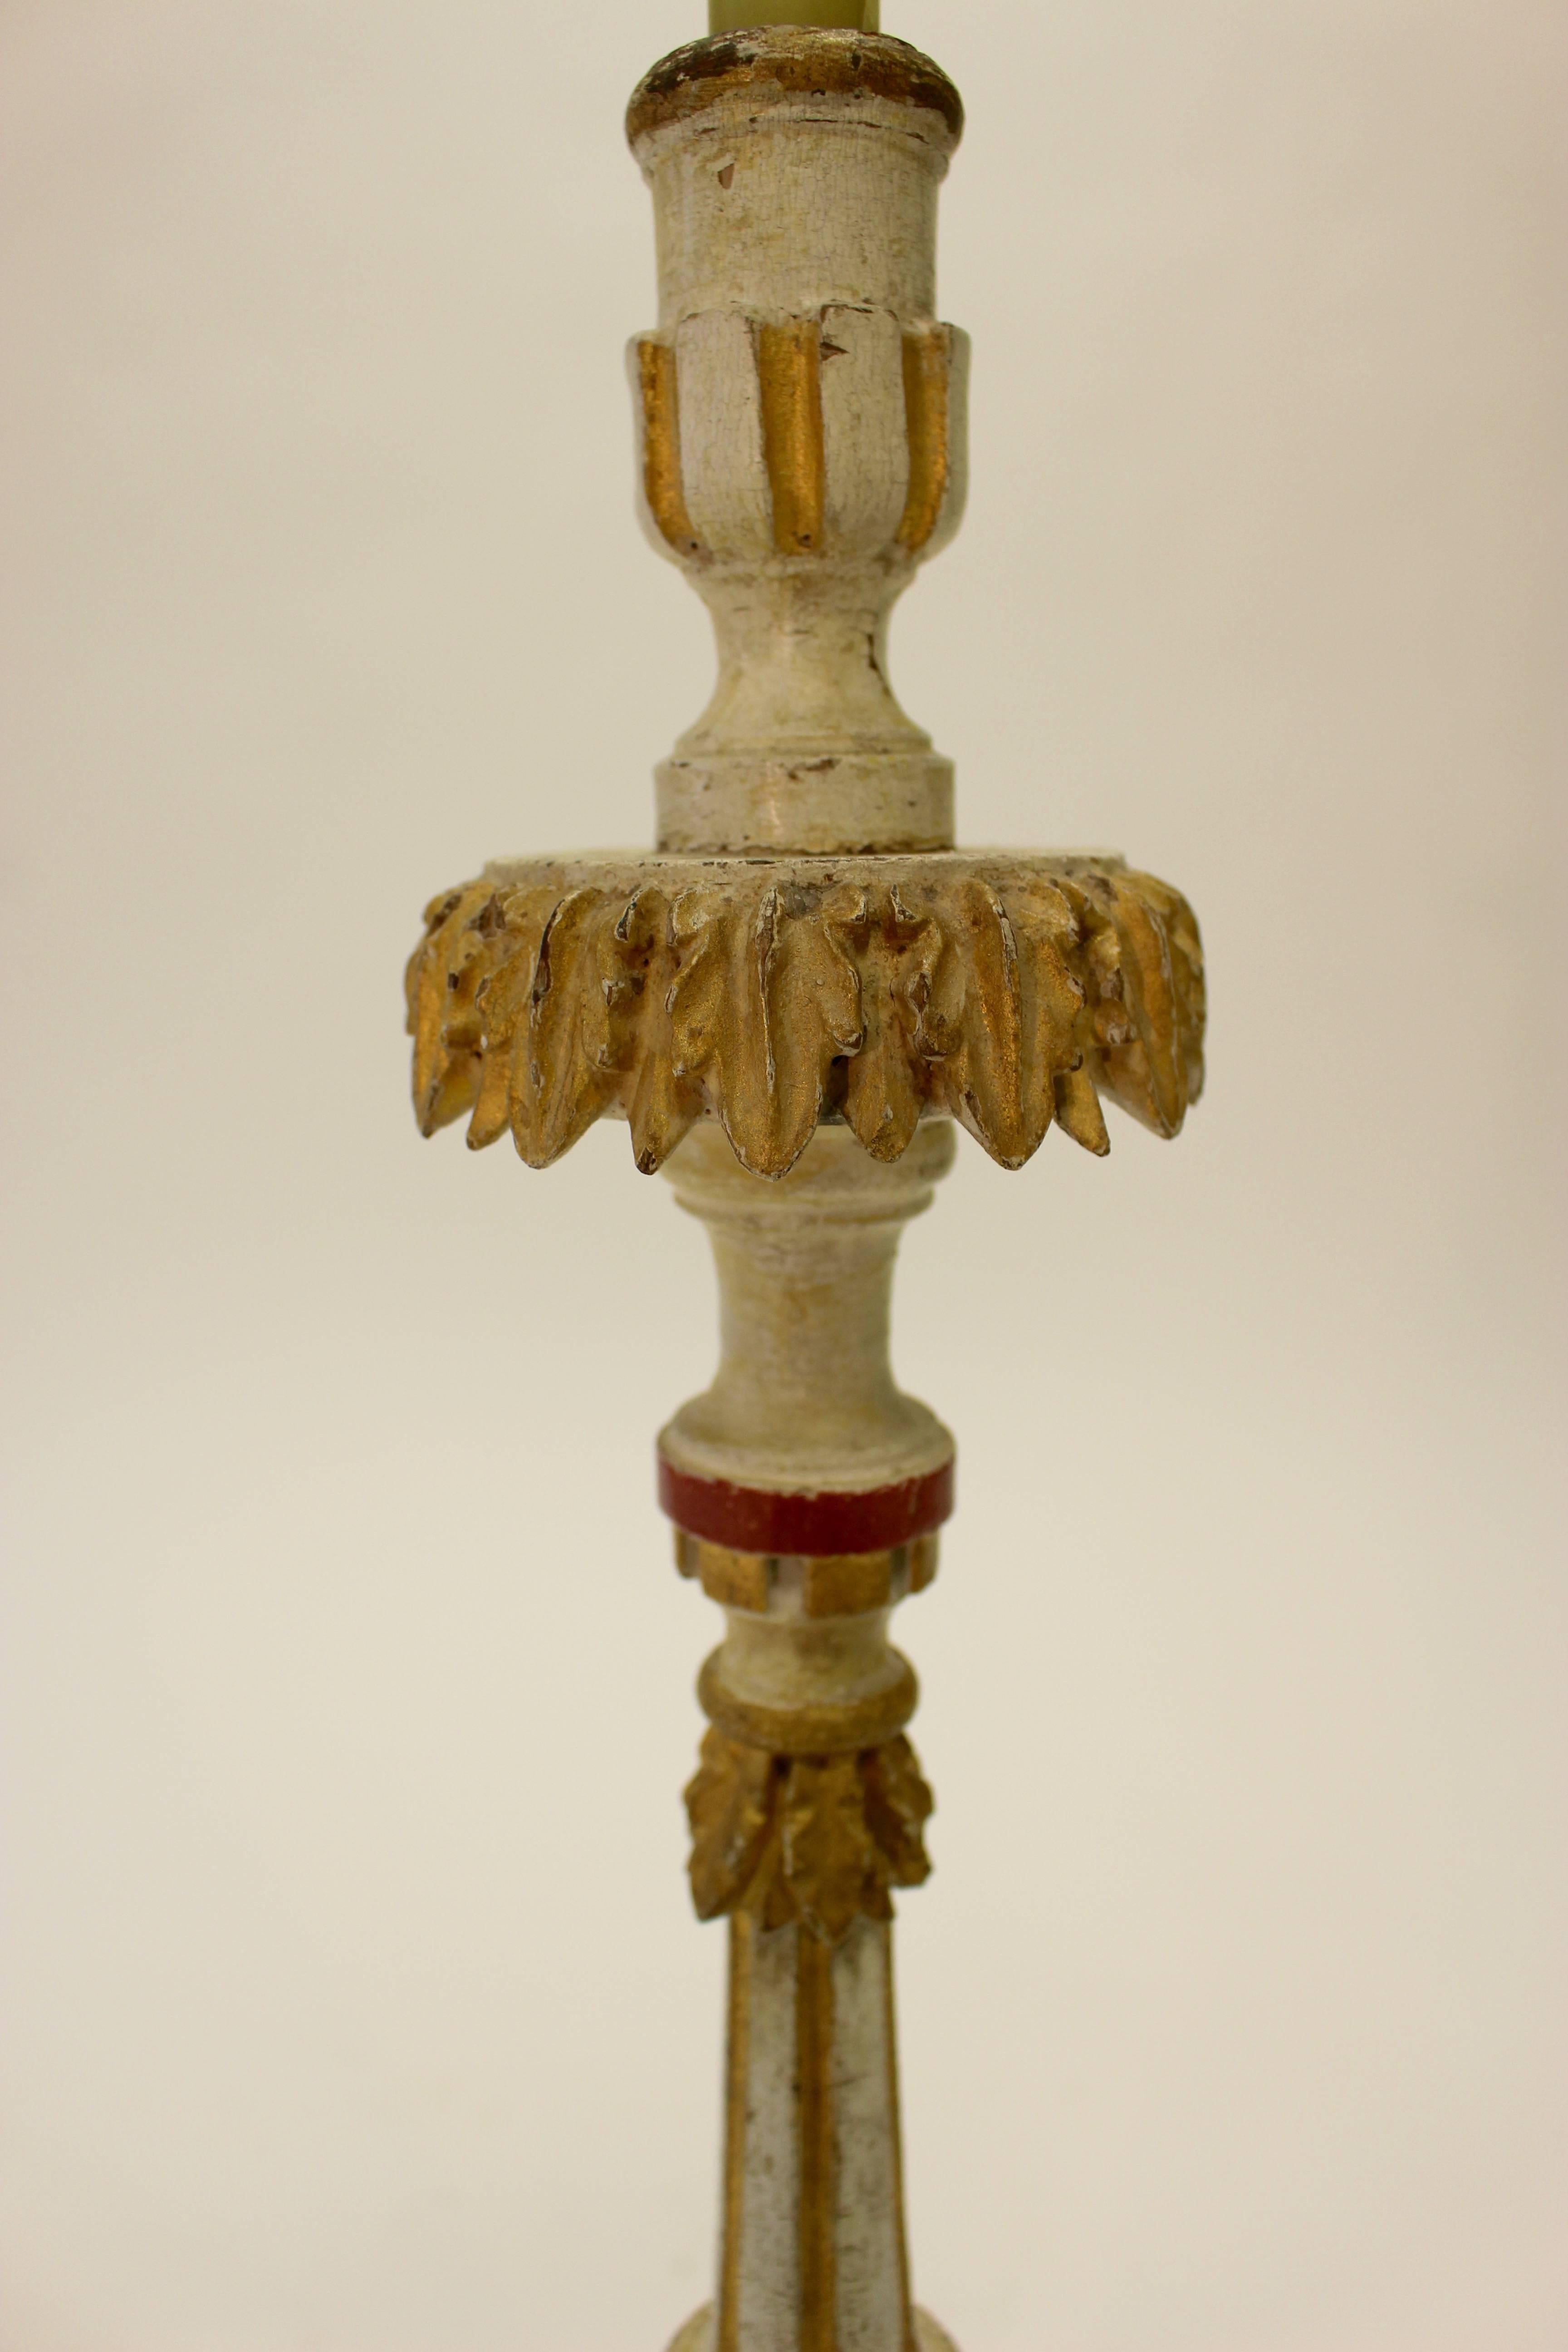 Pair of 19th Century Italian Cream and Polychrome Decorated Pricket Candlesticks For Sale 3